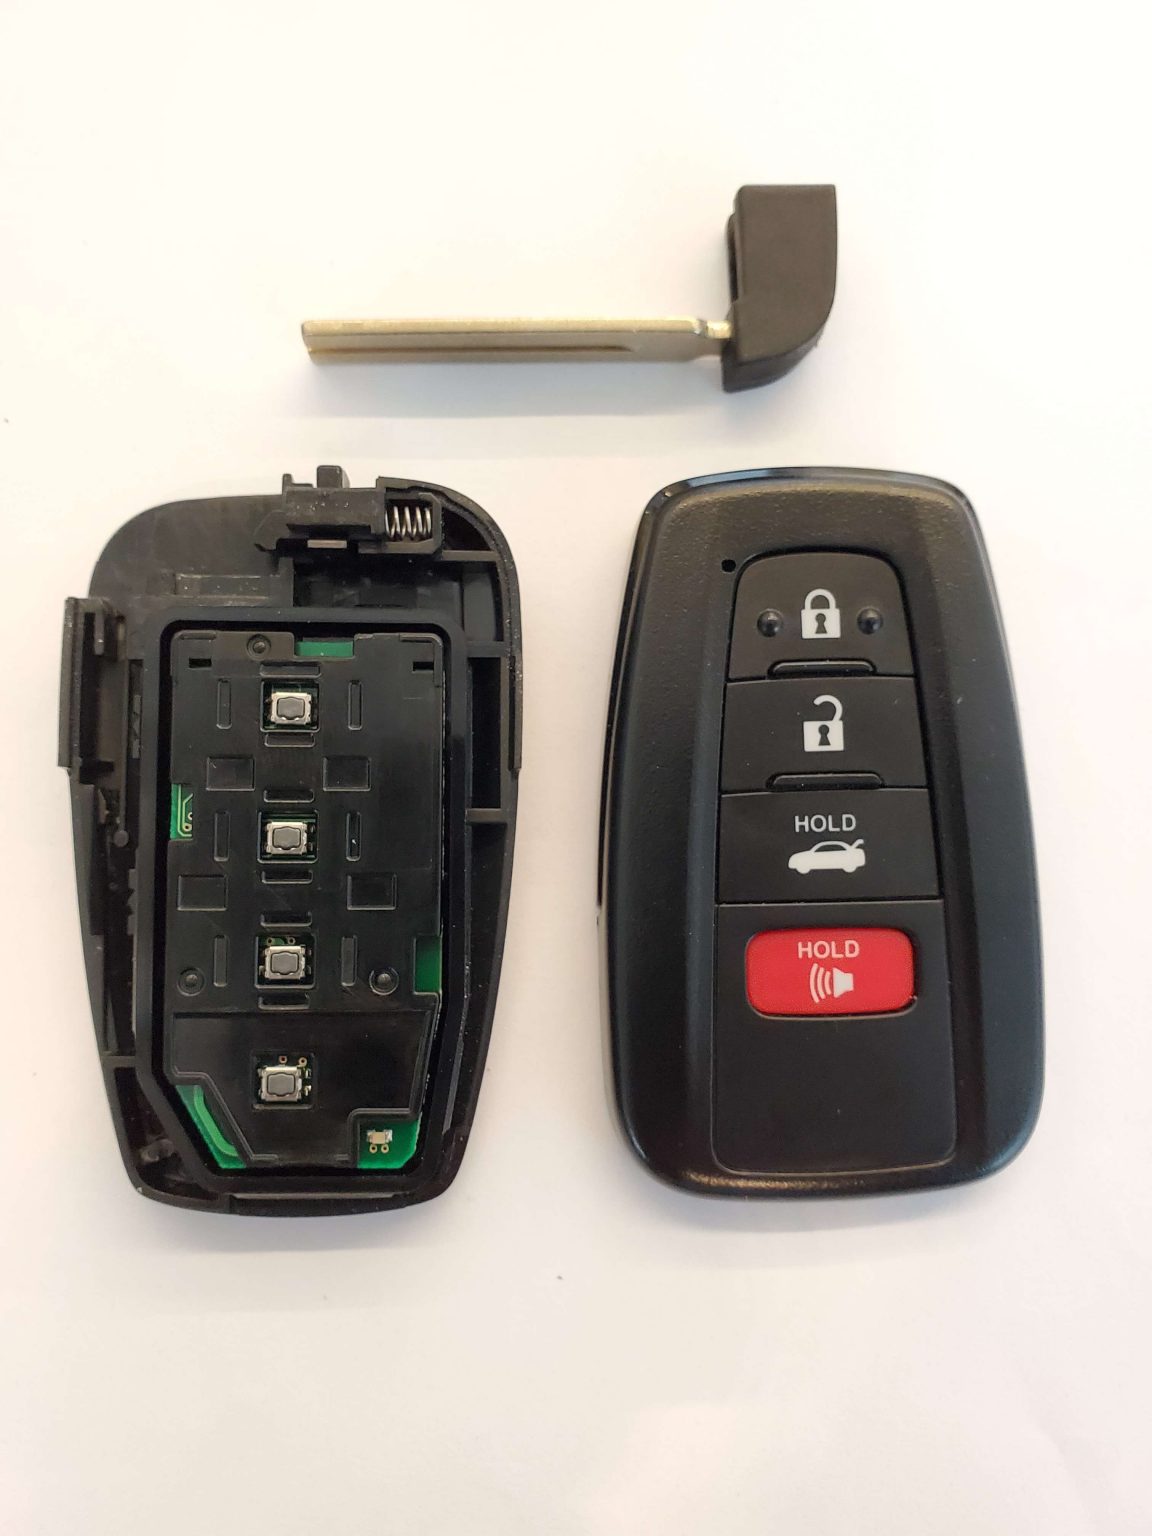 Toyota Corolla Key Replacement What To Do, Options, Costs & More